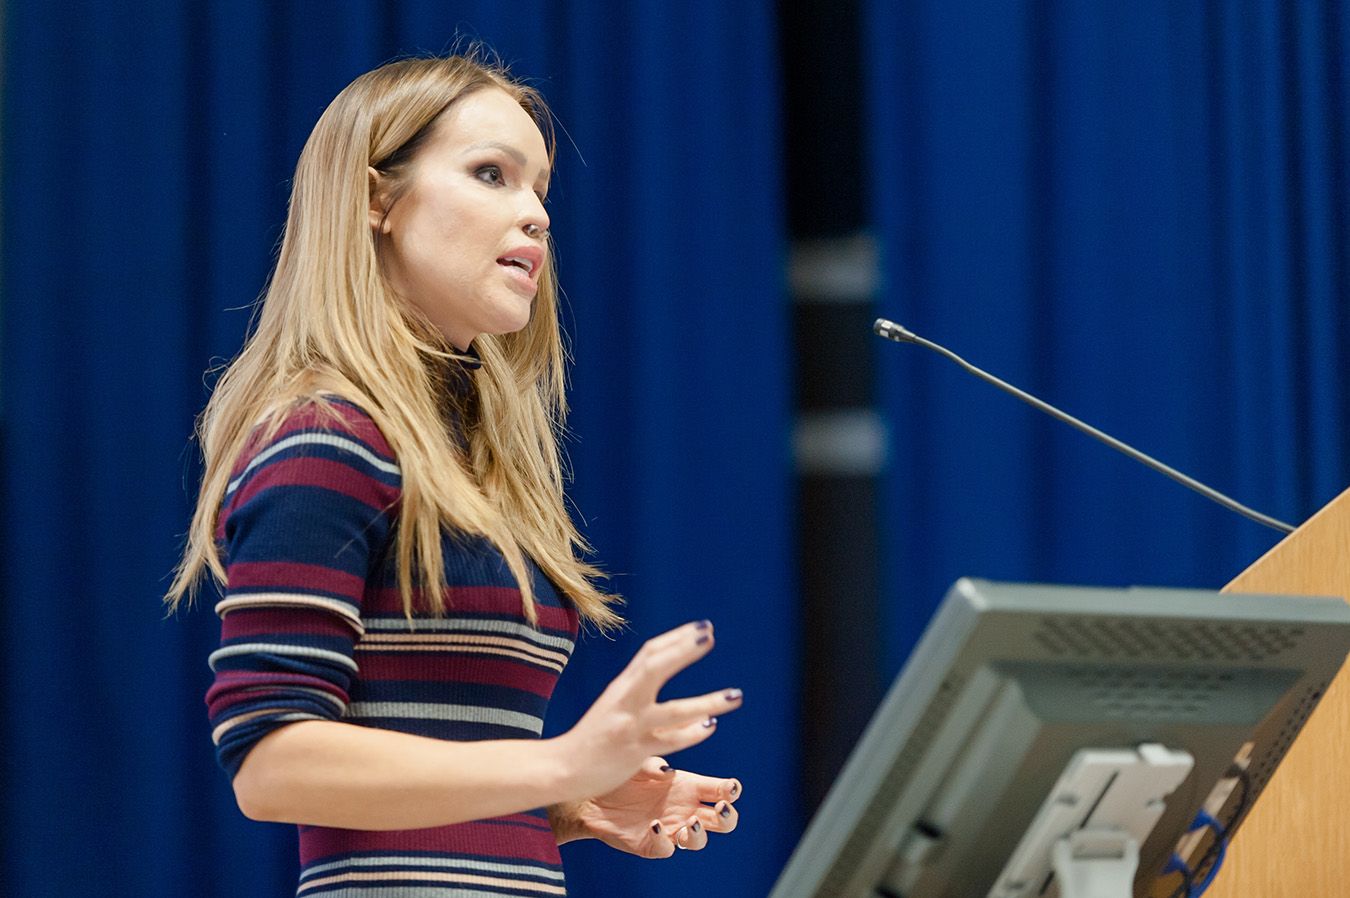 Acid attack survivor Katie Piper told an audience of more than 200 students at Kingston University  how she had learned to hold onto hope